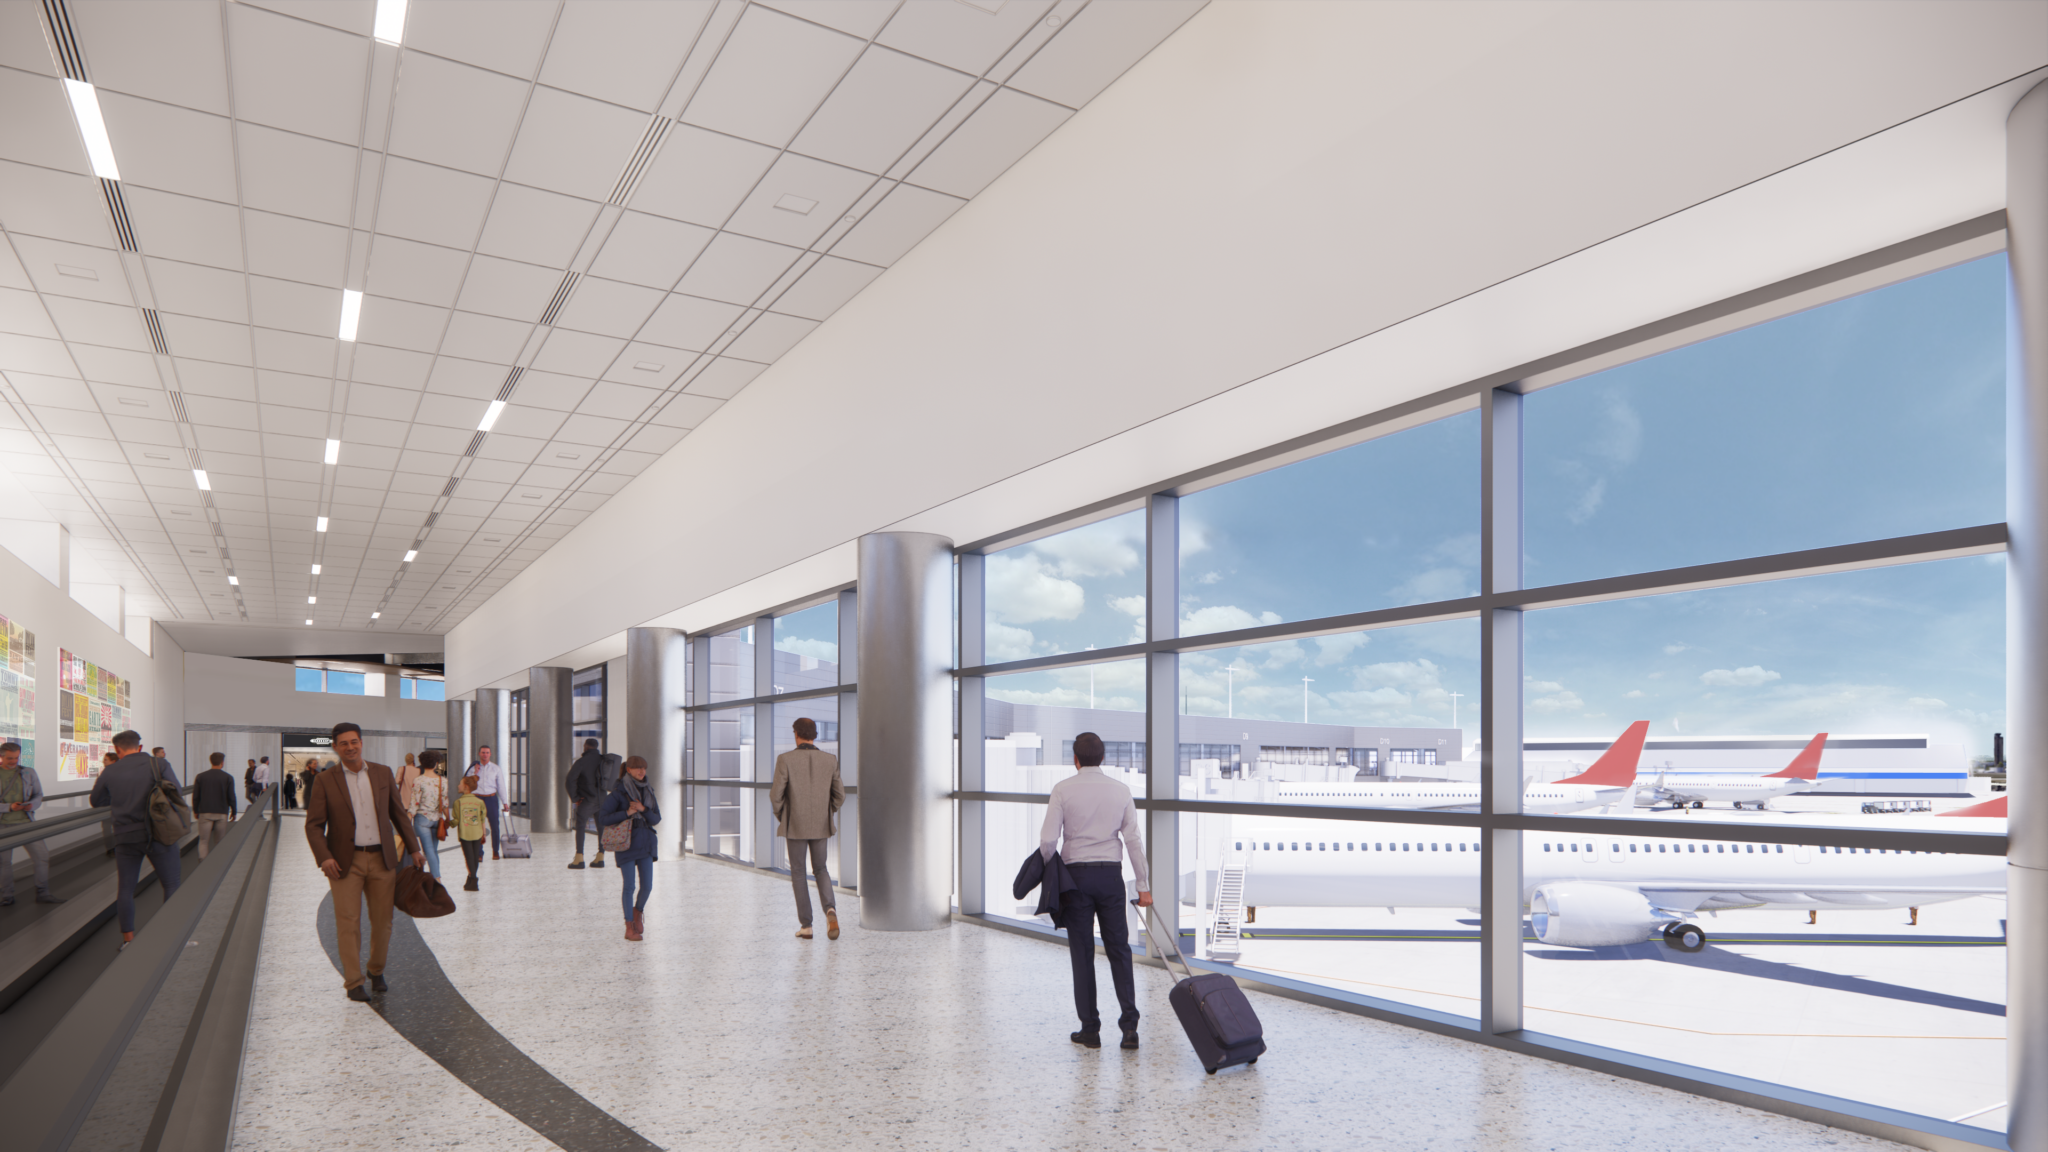 Architectural rendering of Concourse D Extension at Nashville International Airport